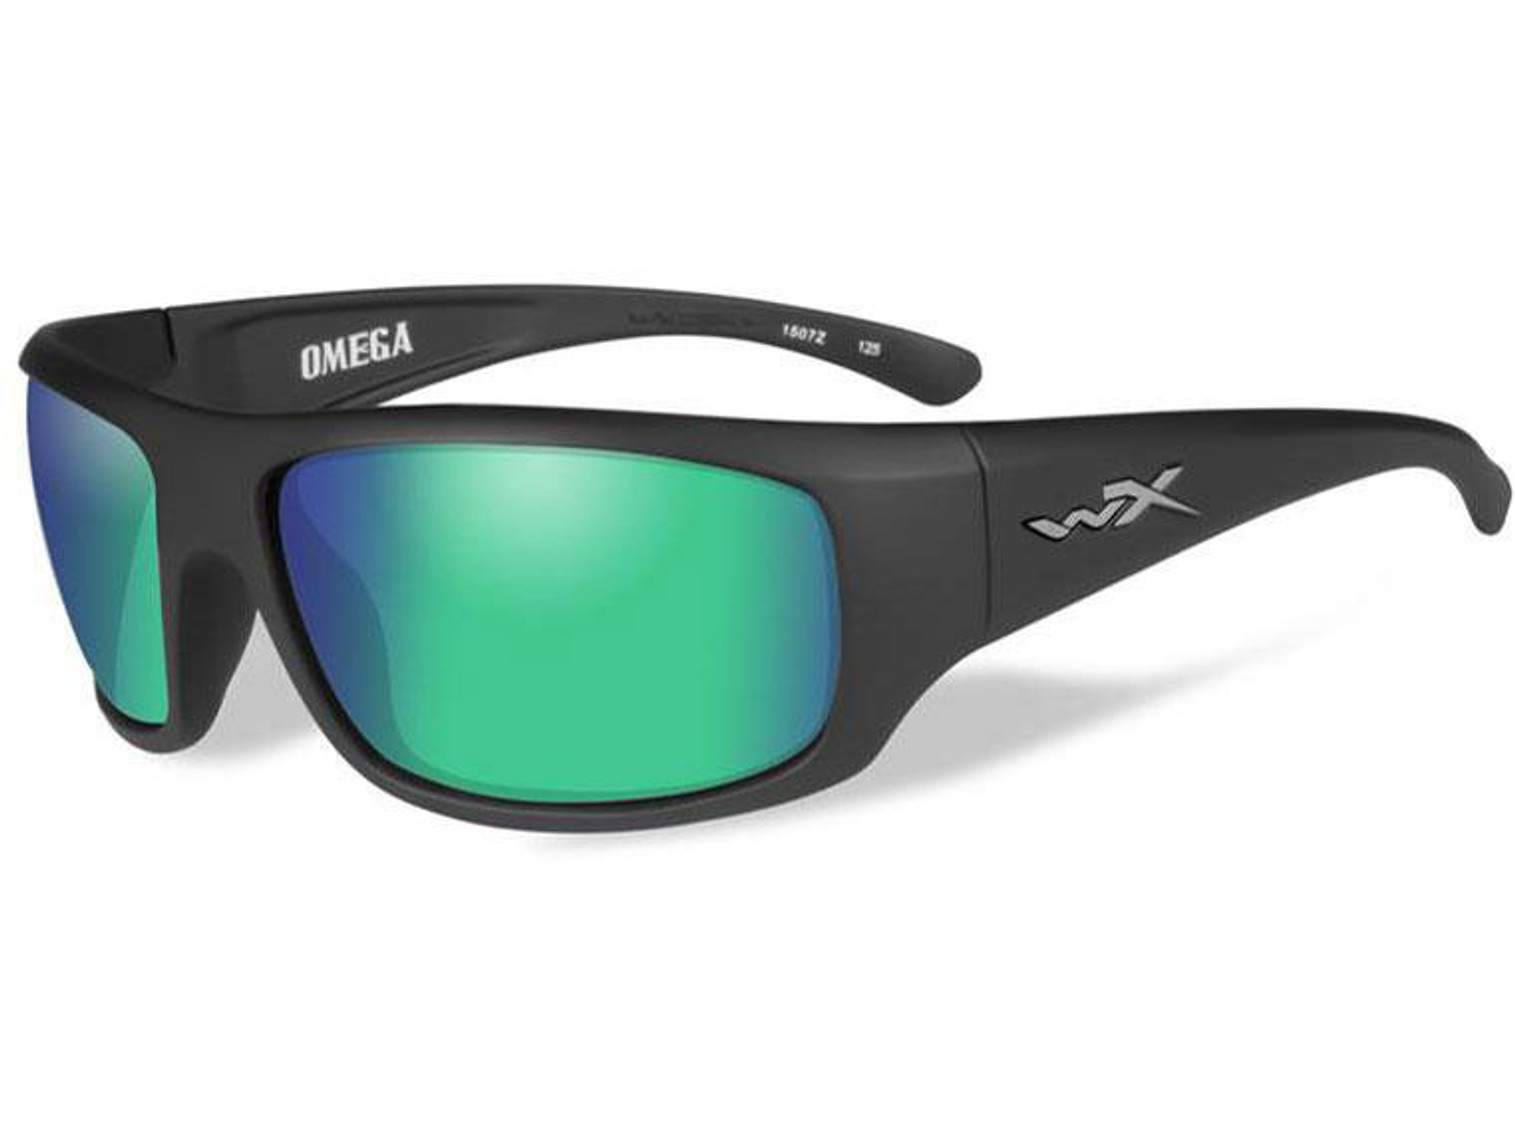 Wiley X Omega Polarized Sunglasses (Color: Polarized Emerald Mirror Lens with Matte Black frame)